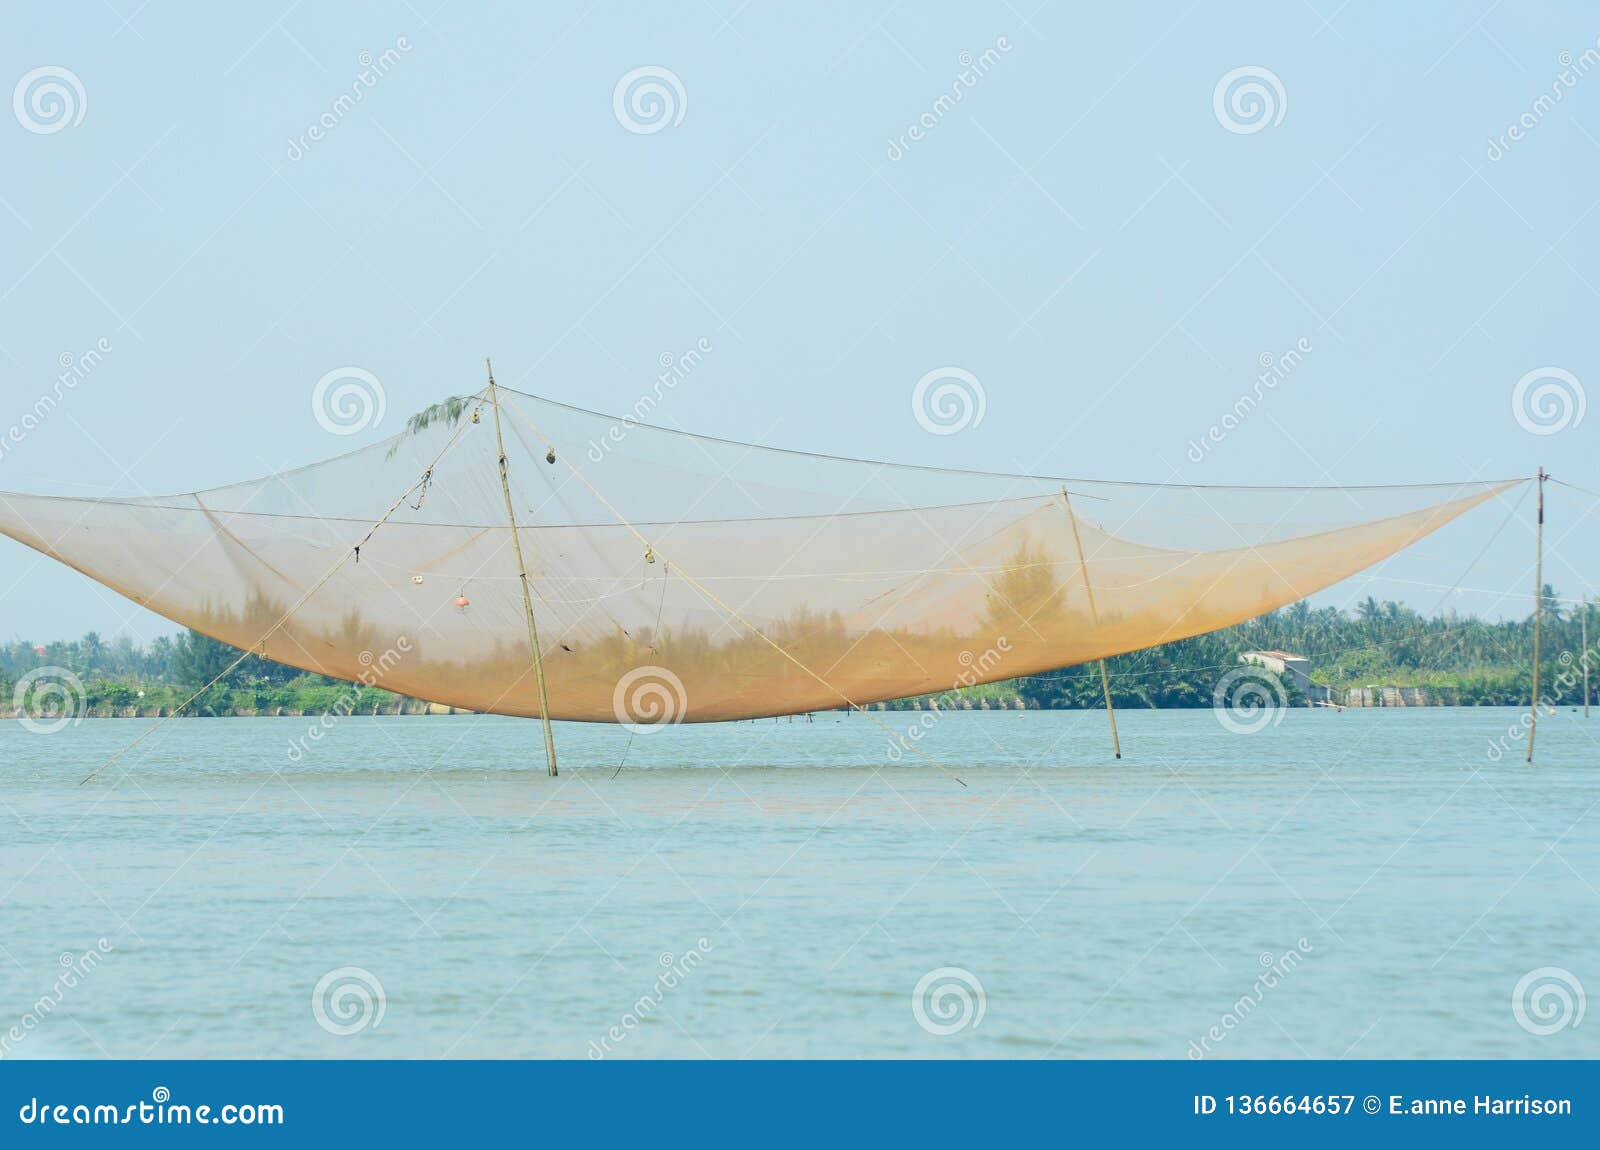 A Large Fishing Net Hanging Over Blue Water Stock Image - Image of